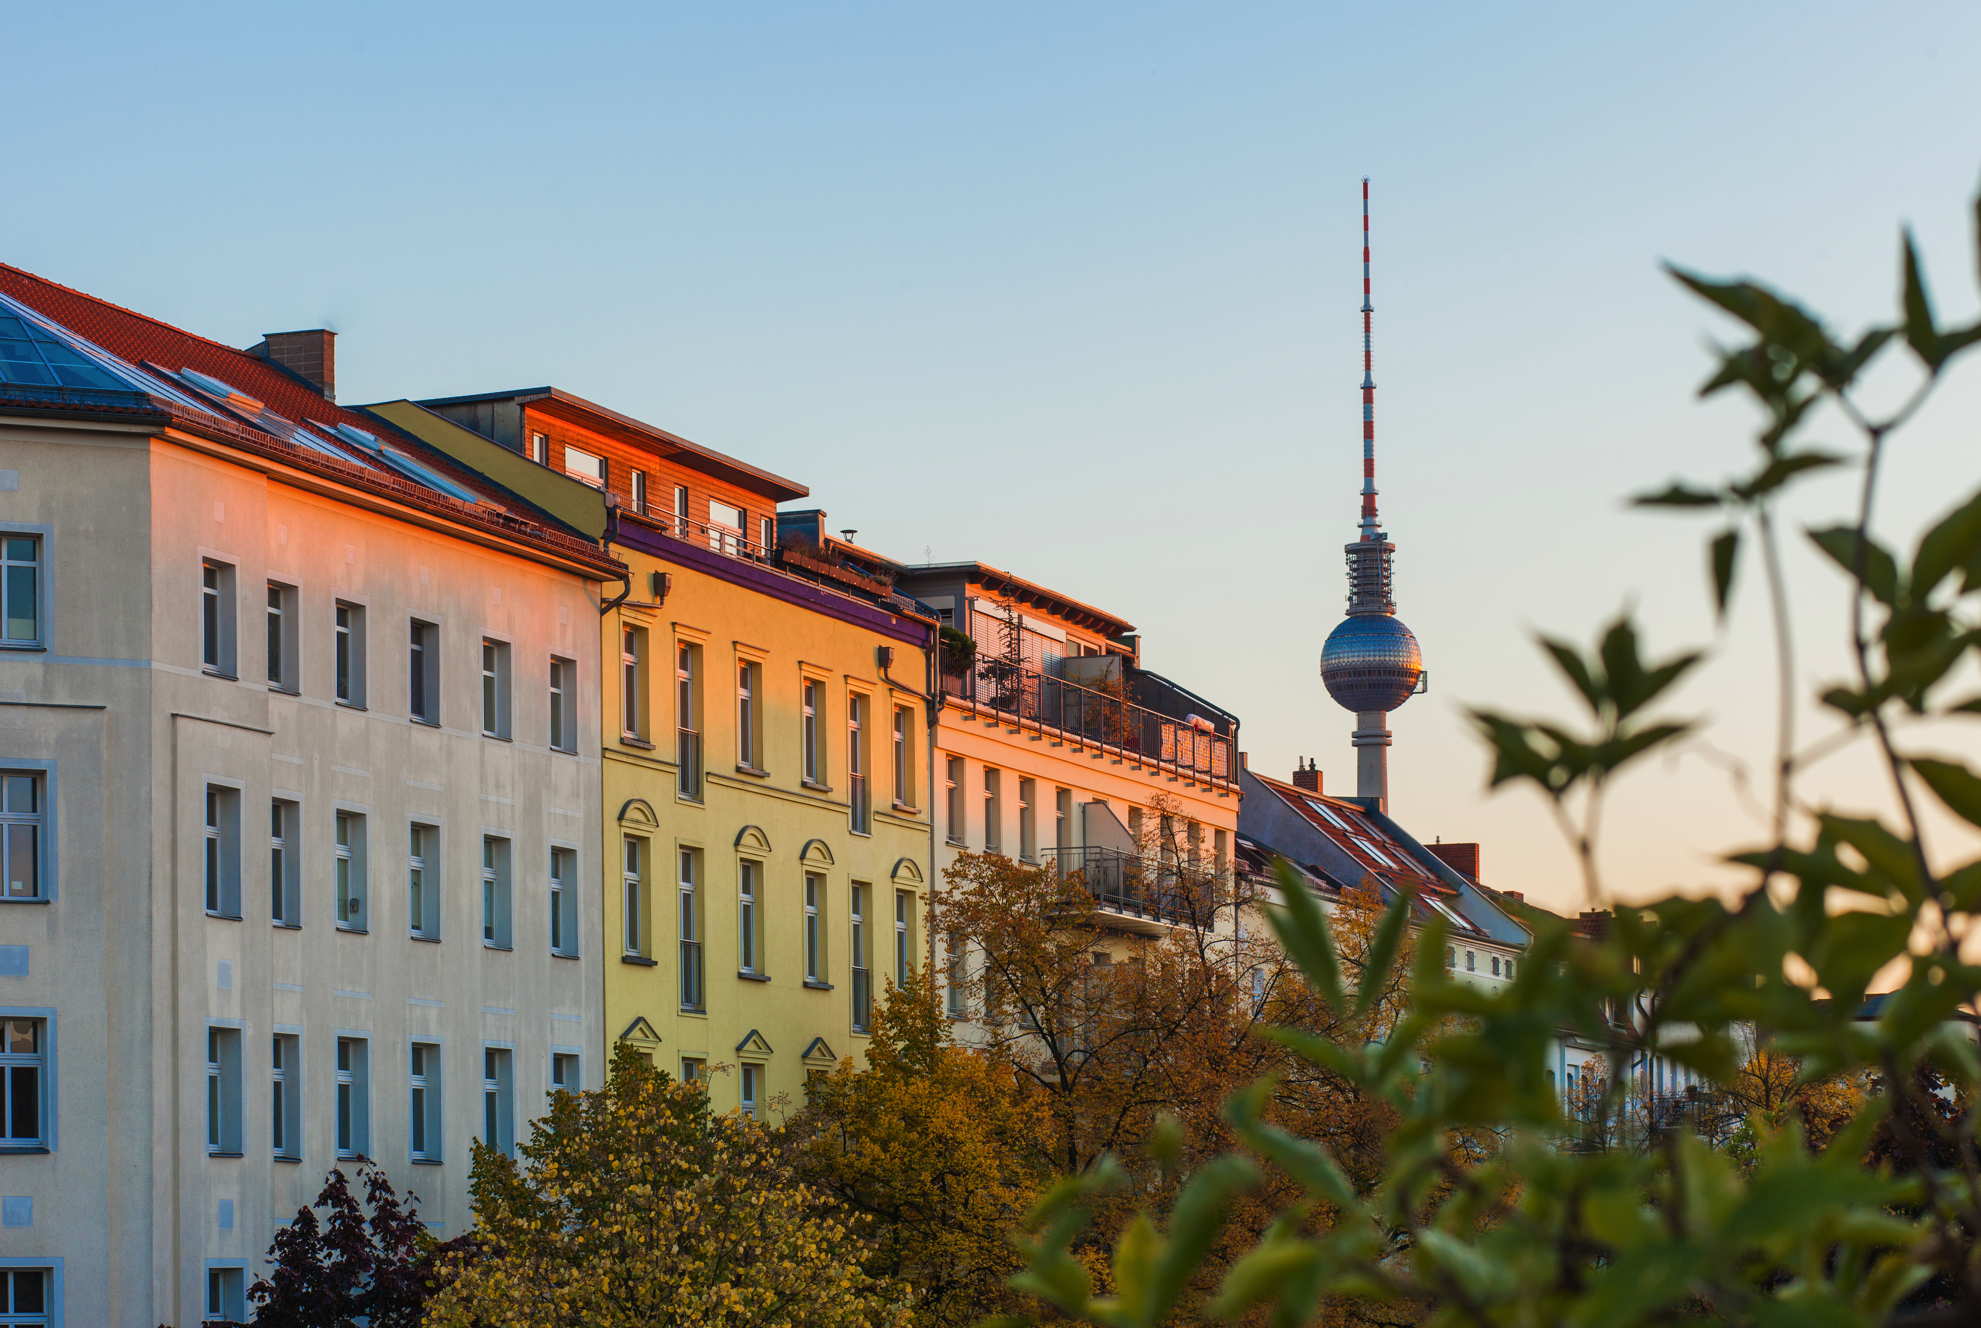 View of a street in Berlin with the television tower in the background